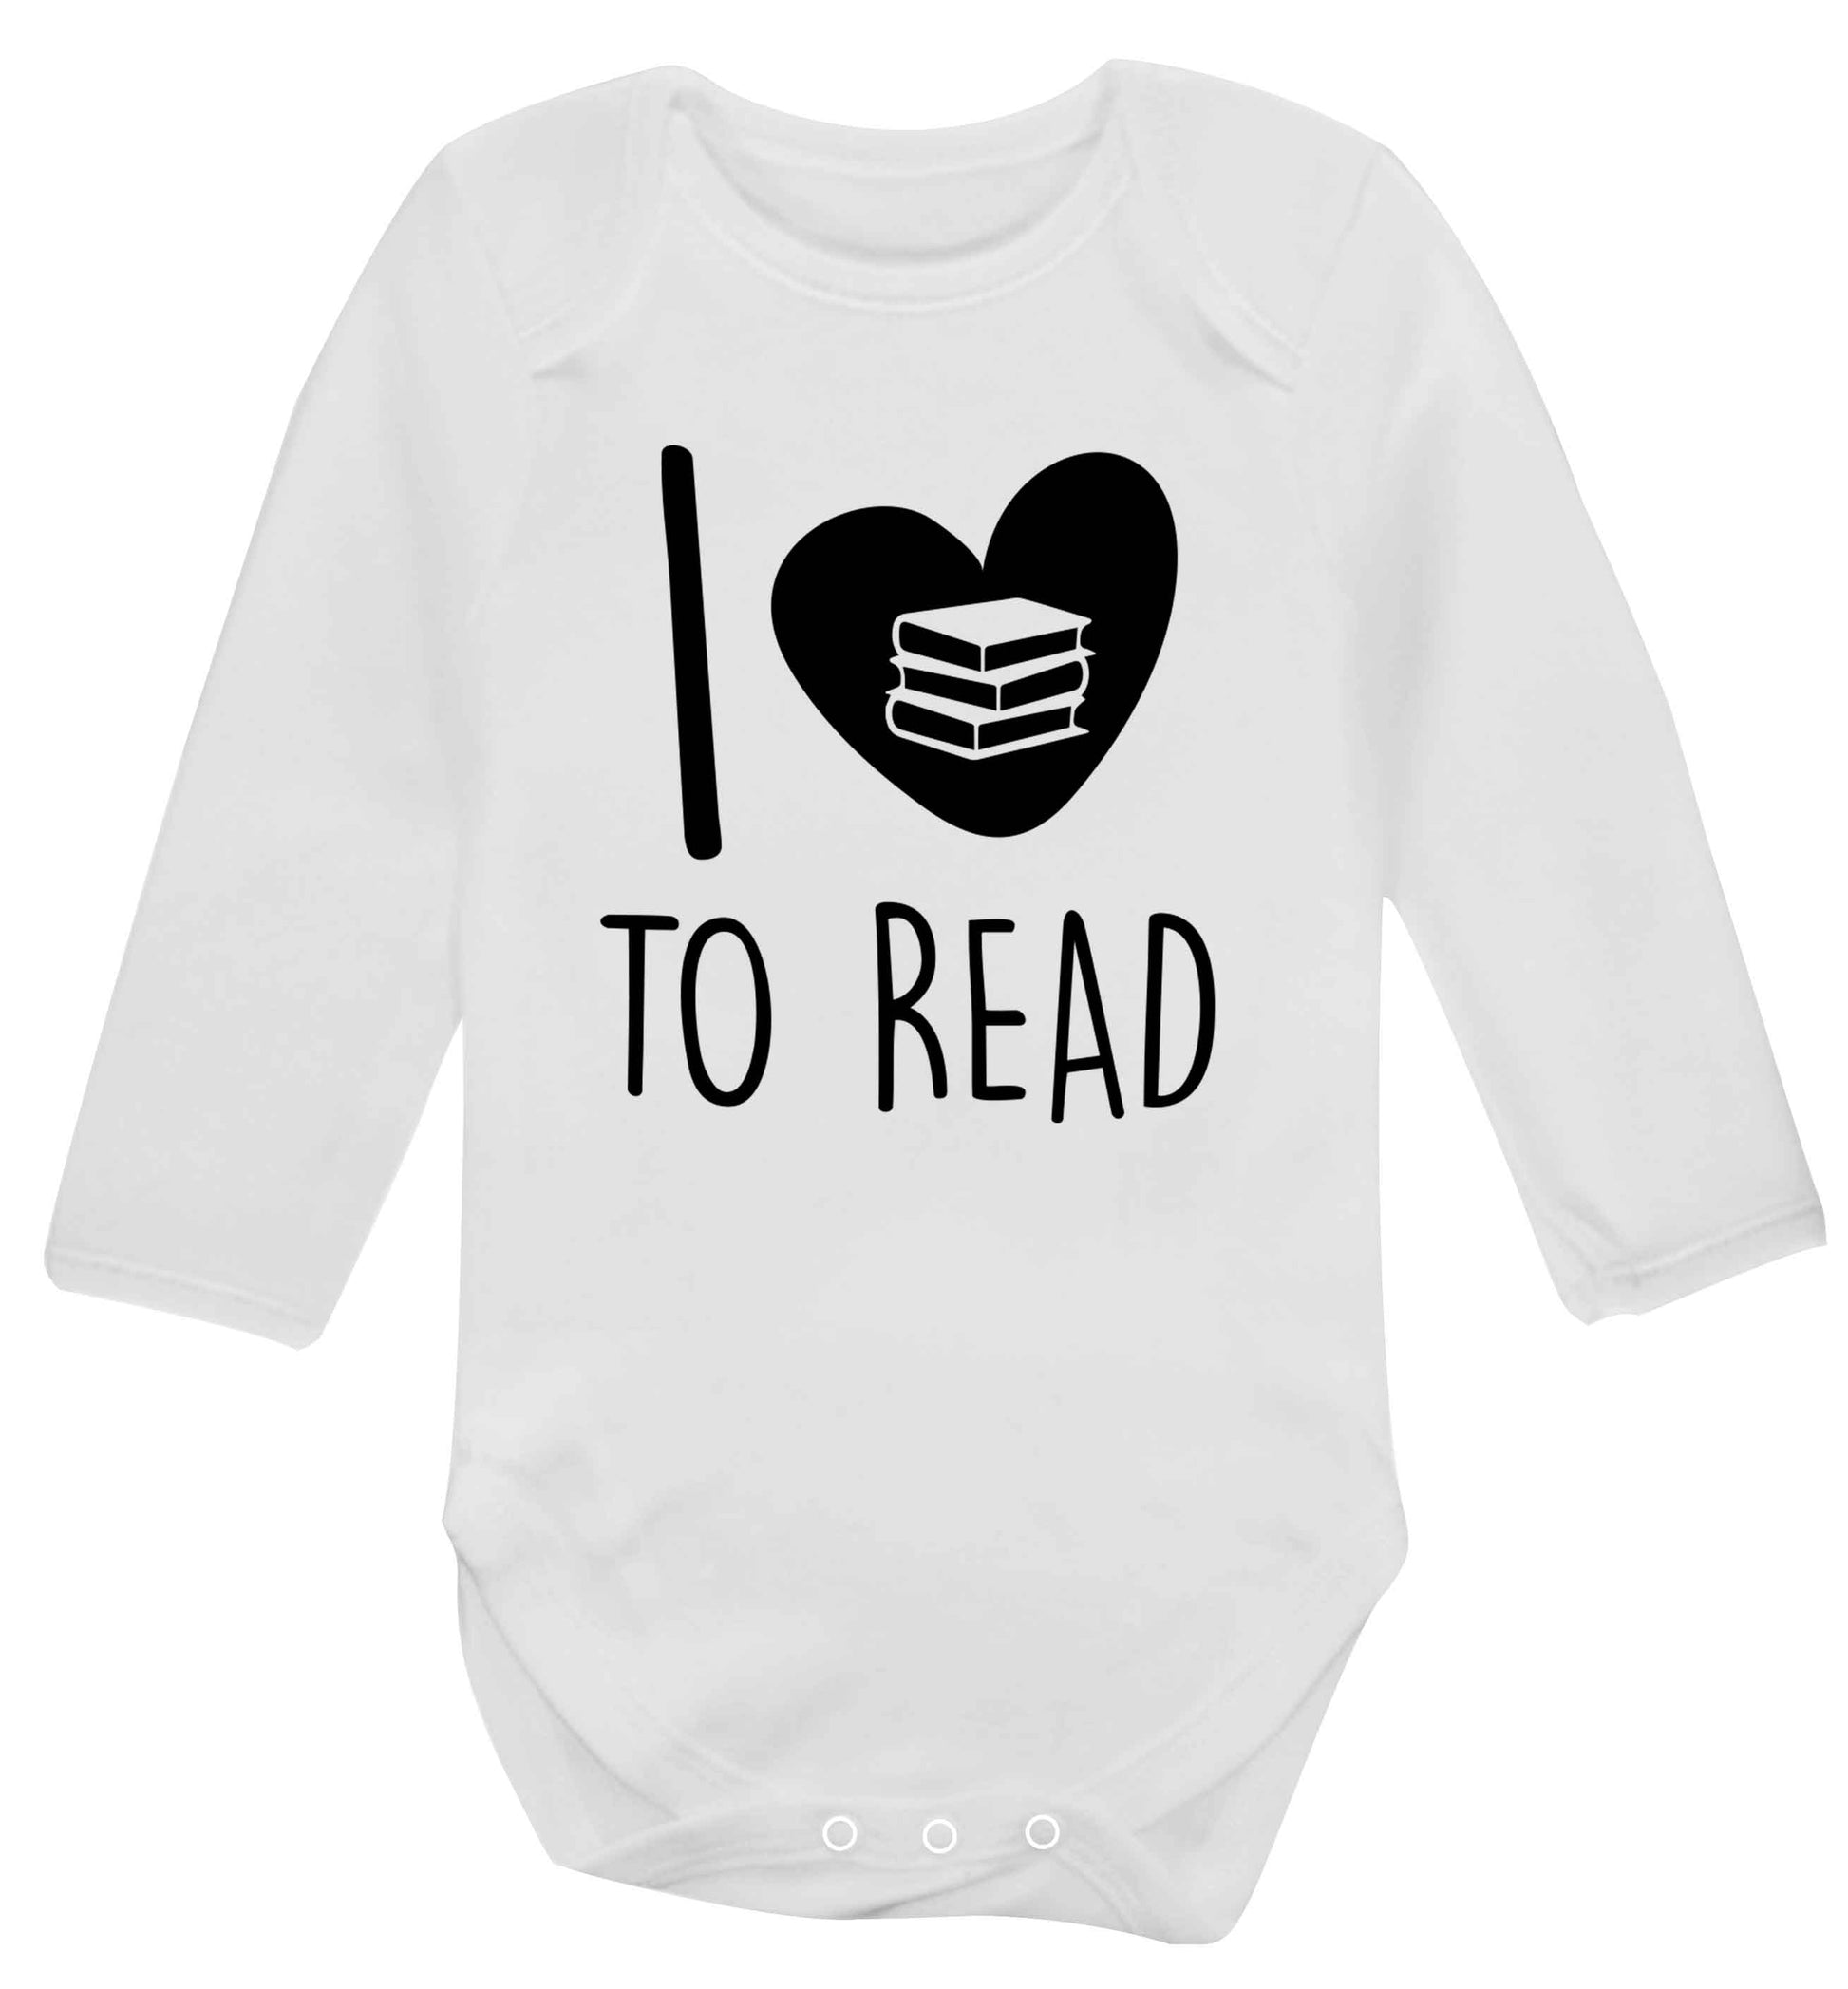 I love to read Baby Vest long sleeved white 6-12 months